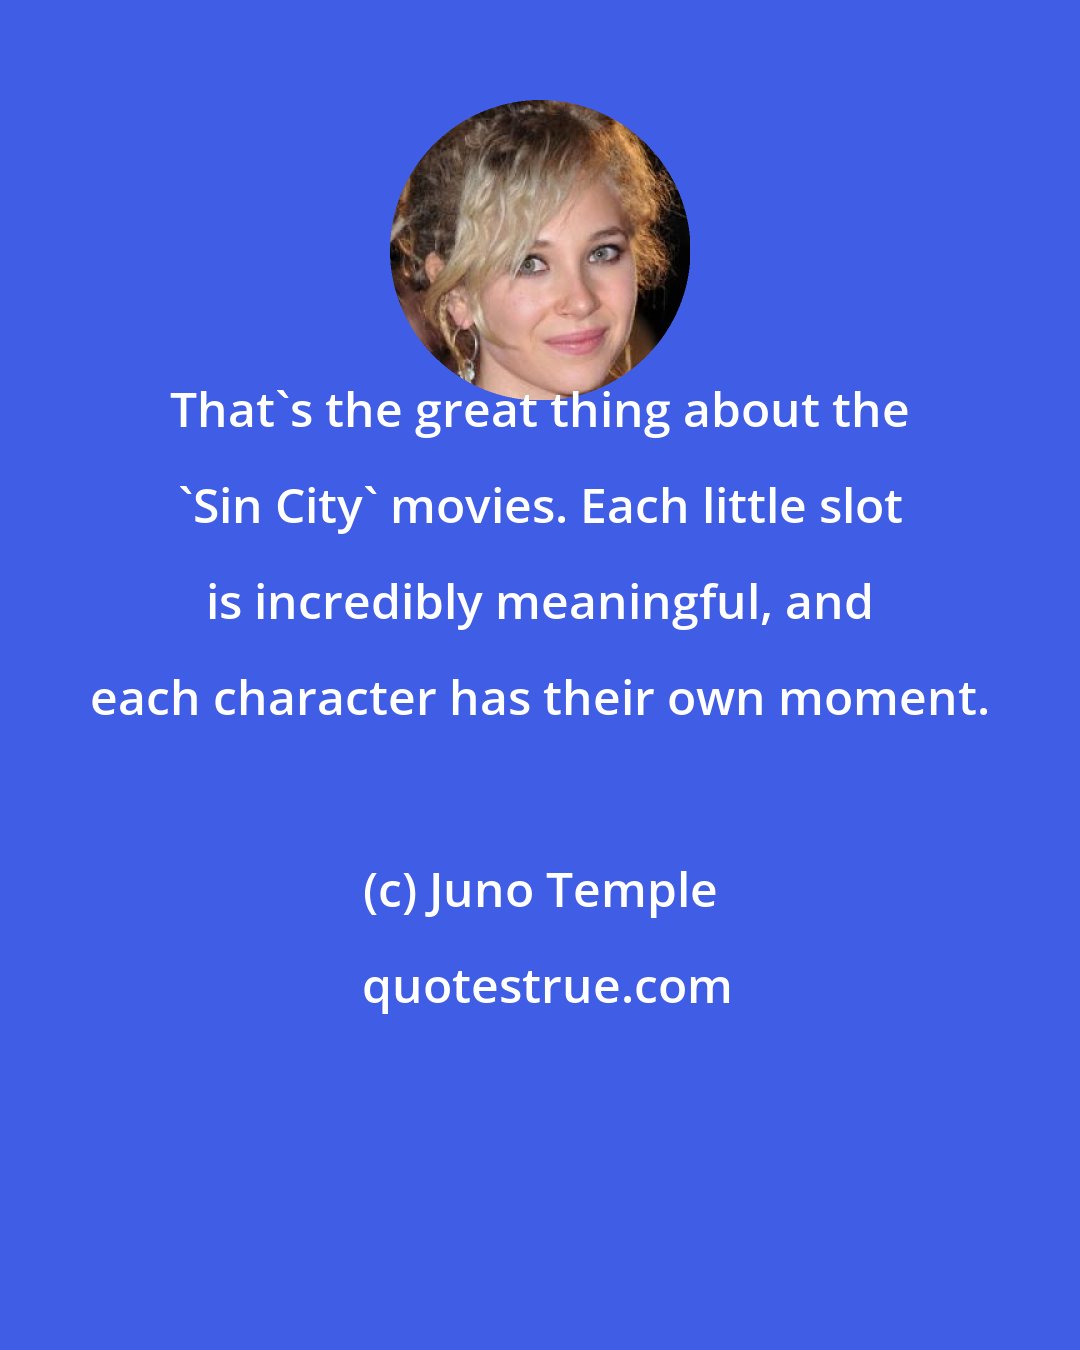 Juno Temple: That's the great thing about the 'Sin City' movies. Each little slot is incredibly meaningful, and each character has their own moment.